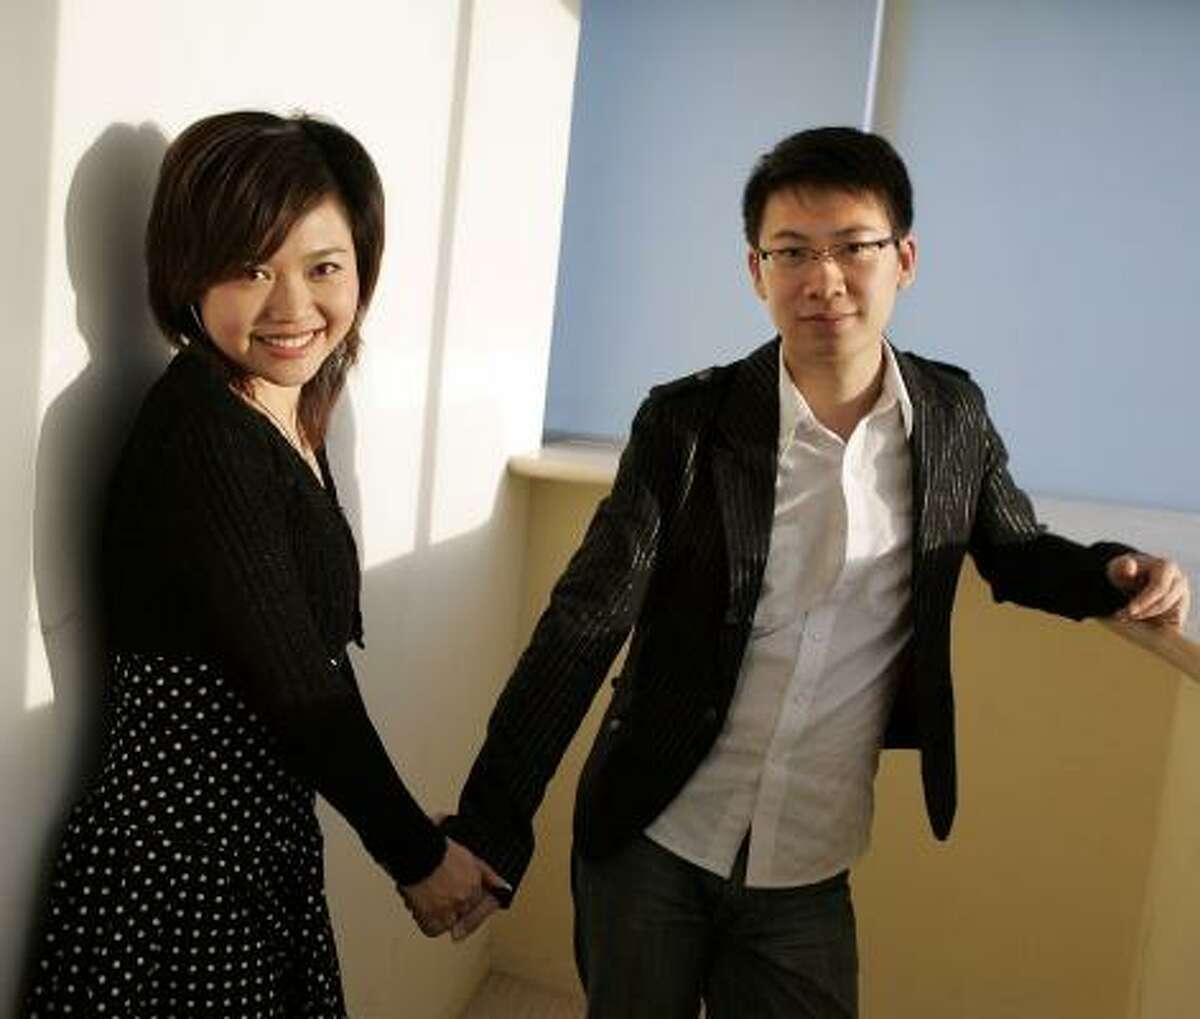 May Yao, left, used online matchmaking Web site Baihe.com to meet Donny Liang. The two are engaged.